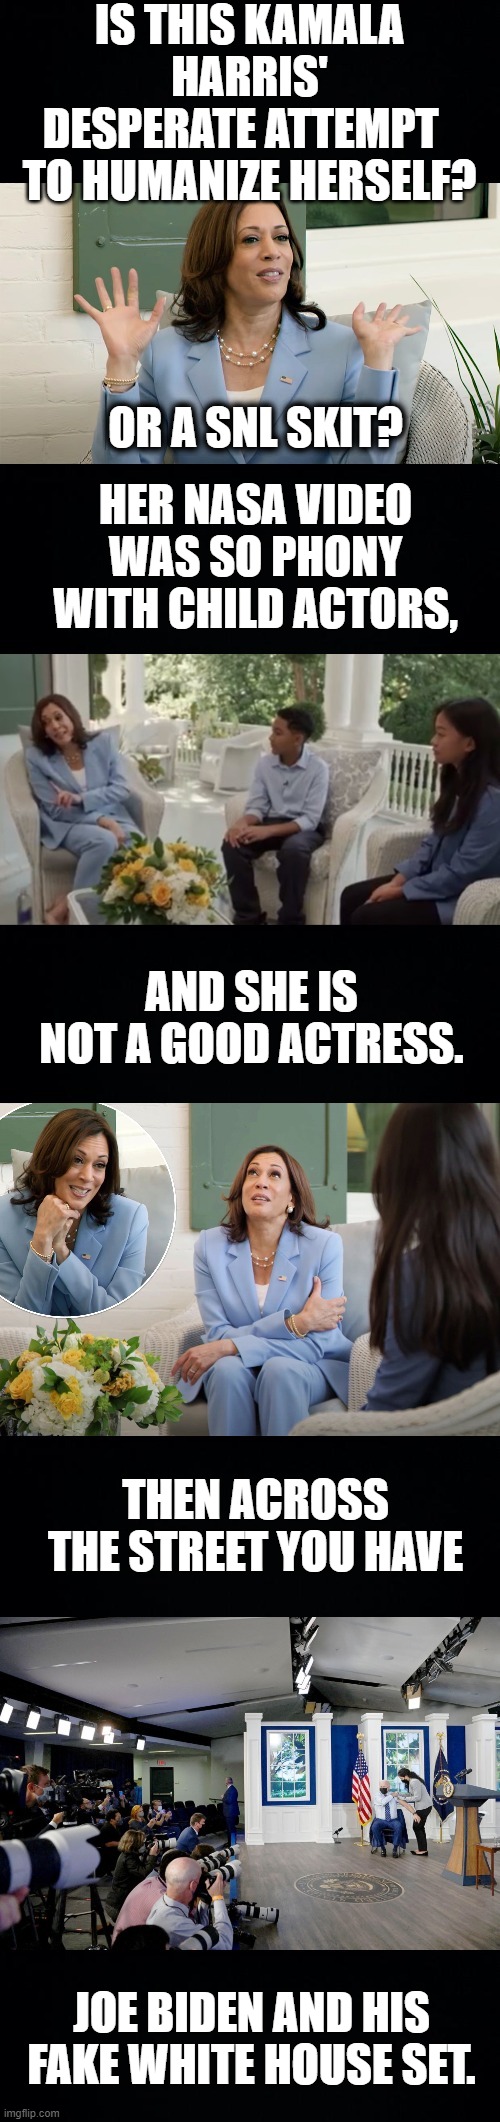 They're Both So Fake! | IS THIS KAMALA HARRIS' DESPERATE ATTEMPT   TO HUMANIZE HERSELF? OR A SNL SKIT? HER NASA VIDEO WAS SO PHONY WITH CHILD ACTORS, AND SHE IS NOT A GOOD ACTRESS. THEN ACROSS THE STREET YOU HAVE; JOE BIDEN AND HIS FAKE WHITE HOUSE SET. | image tagged in memes,politics,kamala harris,joe biden,fake people,action | made w/ Imgflip meme maker